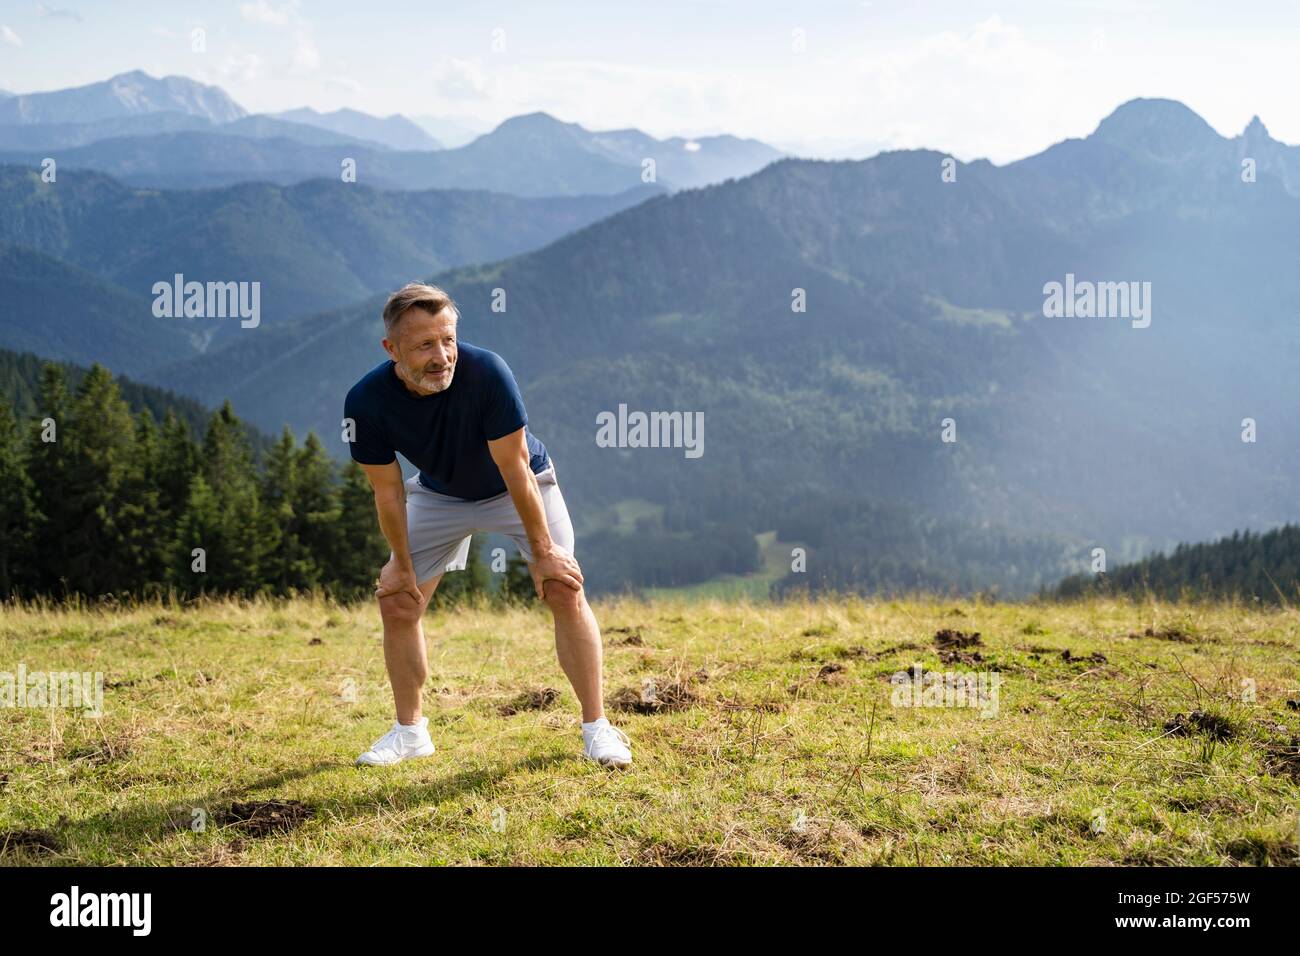 Tired man with hands on knees at mountain during sunny day Stock Photo